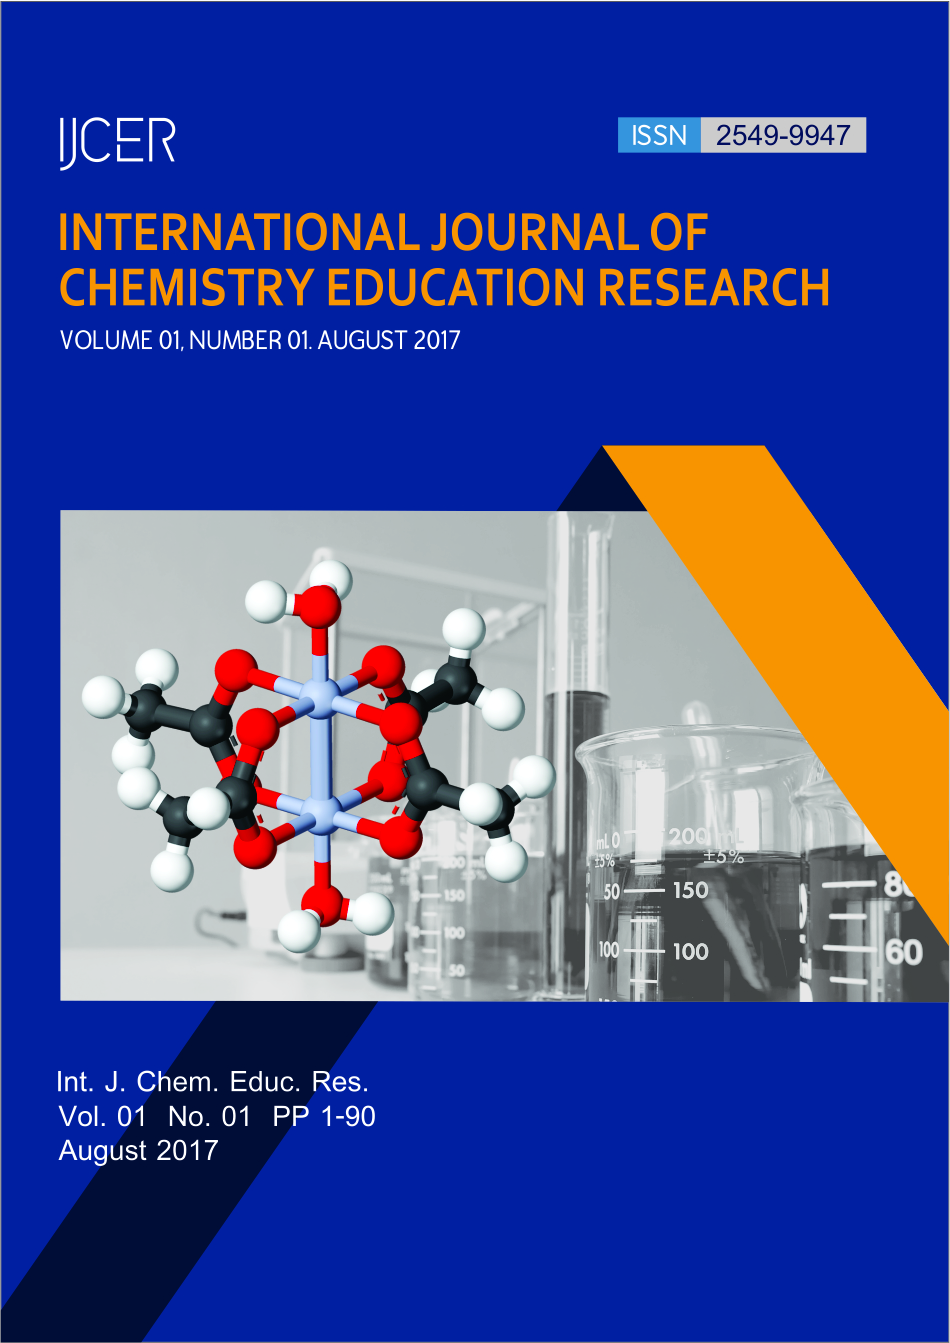 Journal of the chemical society. International Journal of Chemistry. Journal of Chemical Education. Journal of the American Chemical Society. International Journal of Education and research.